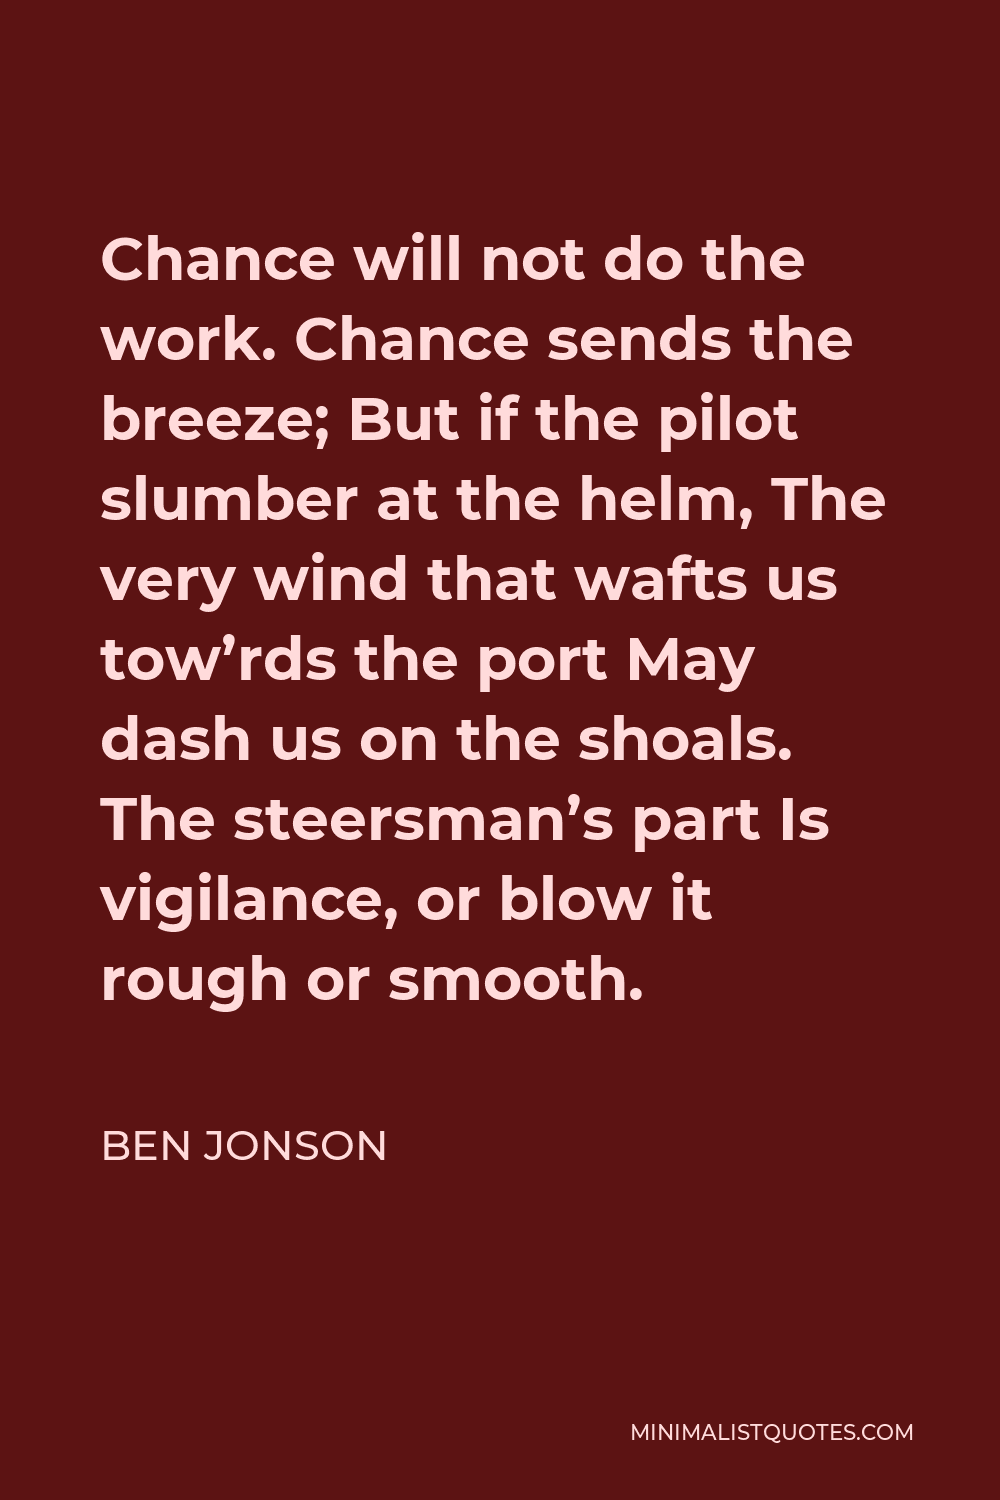 Ben Jonson Quote - Chance will not do the work. Chance sends the breeze; But if the pilot slumber at the helm, The very wind that wafts us tow’rds the port May dash us on the shoals. The steersman’s part Is vigilance, or blow it rough or smooth.